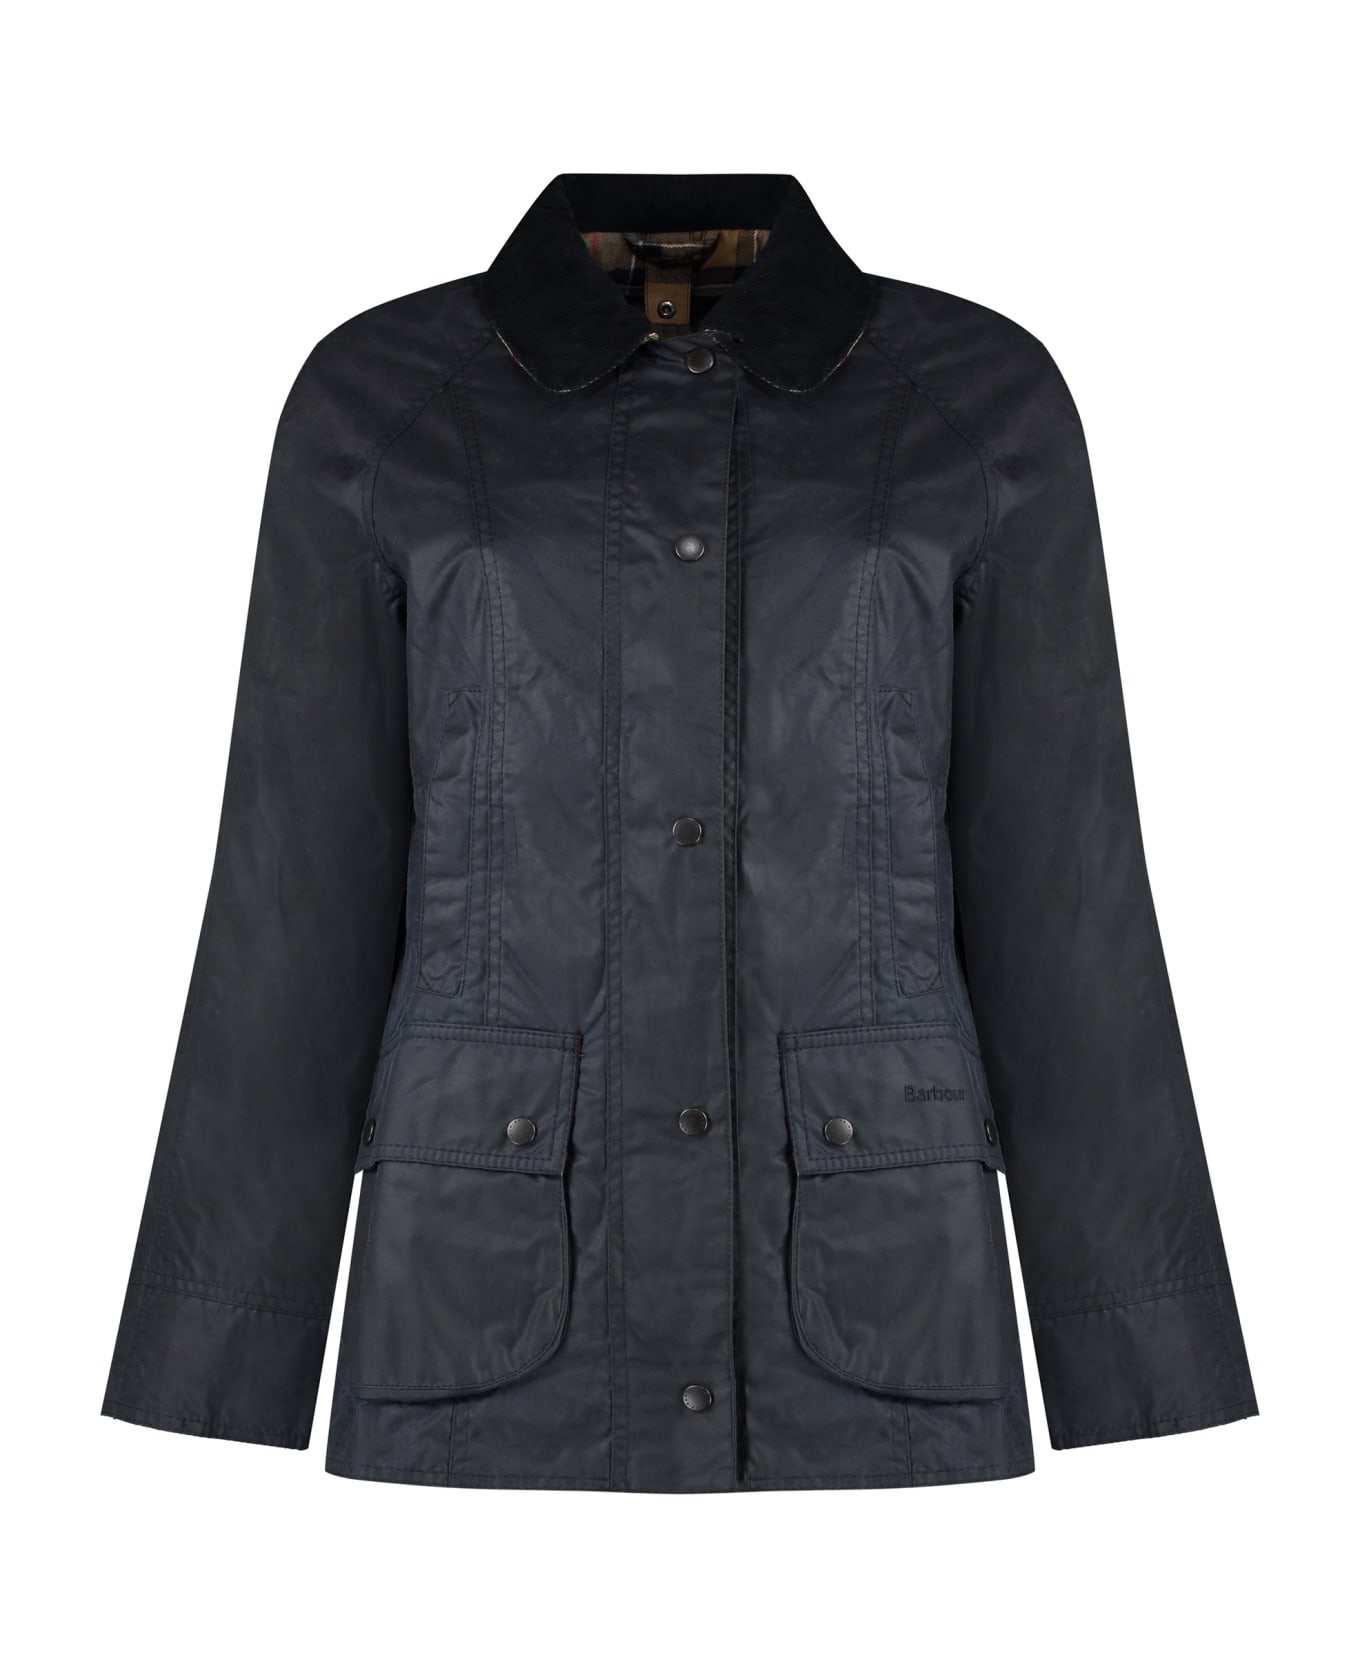 Barbour Beandell Waxed Cotton Jacket - blue